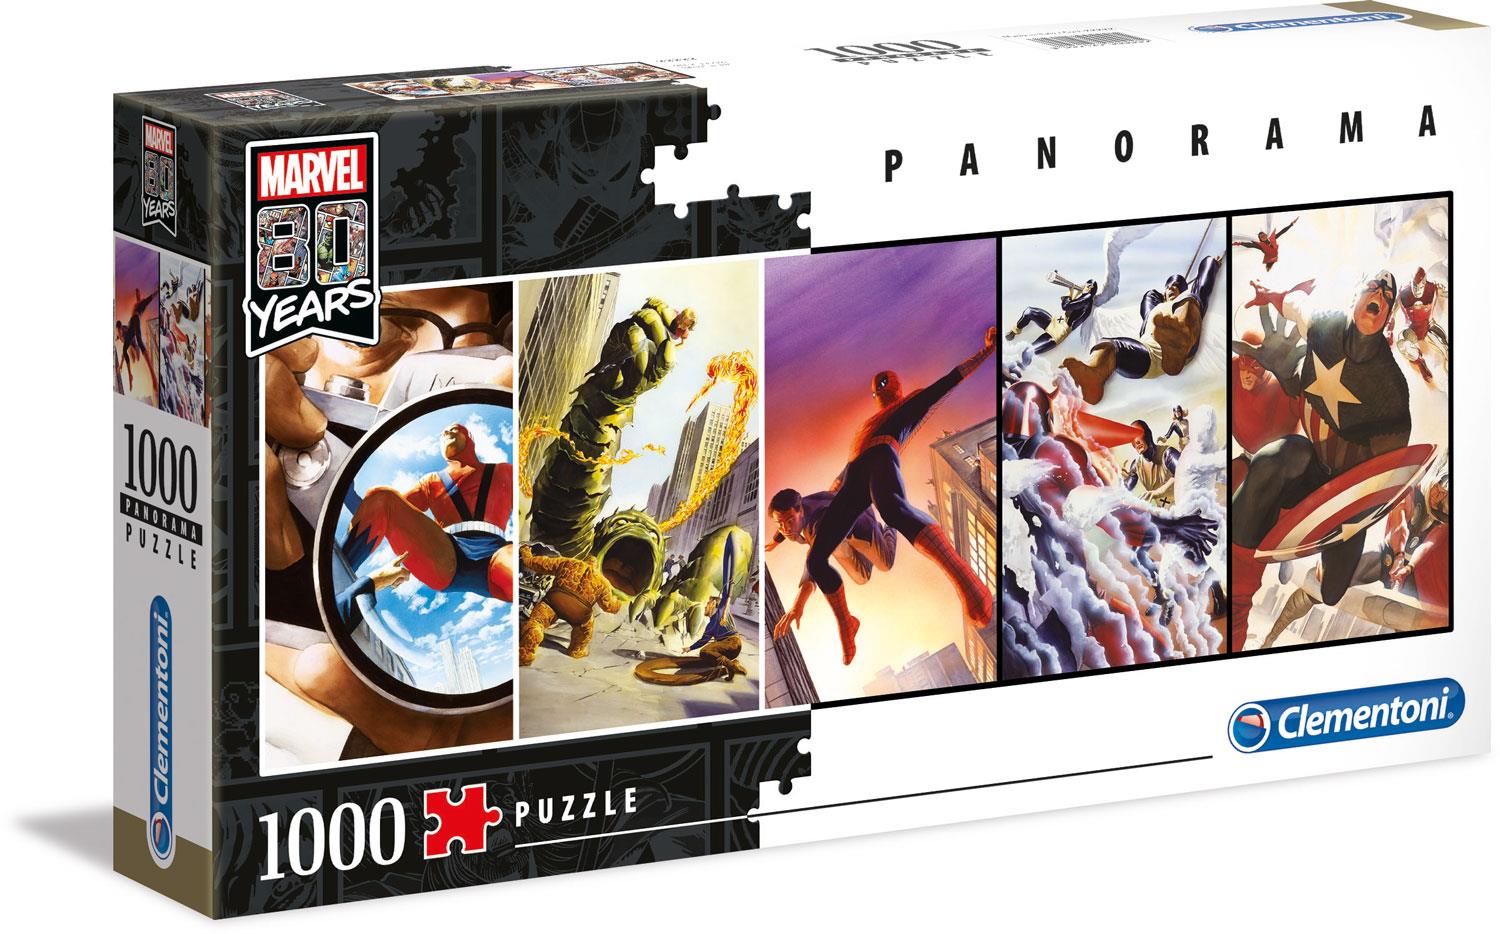 Clementoni Marvel 80 Years Panorama Jigsaw Puzzle (1000 Pieces)